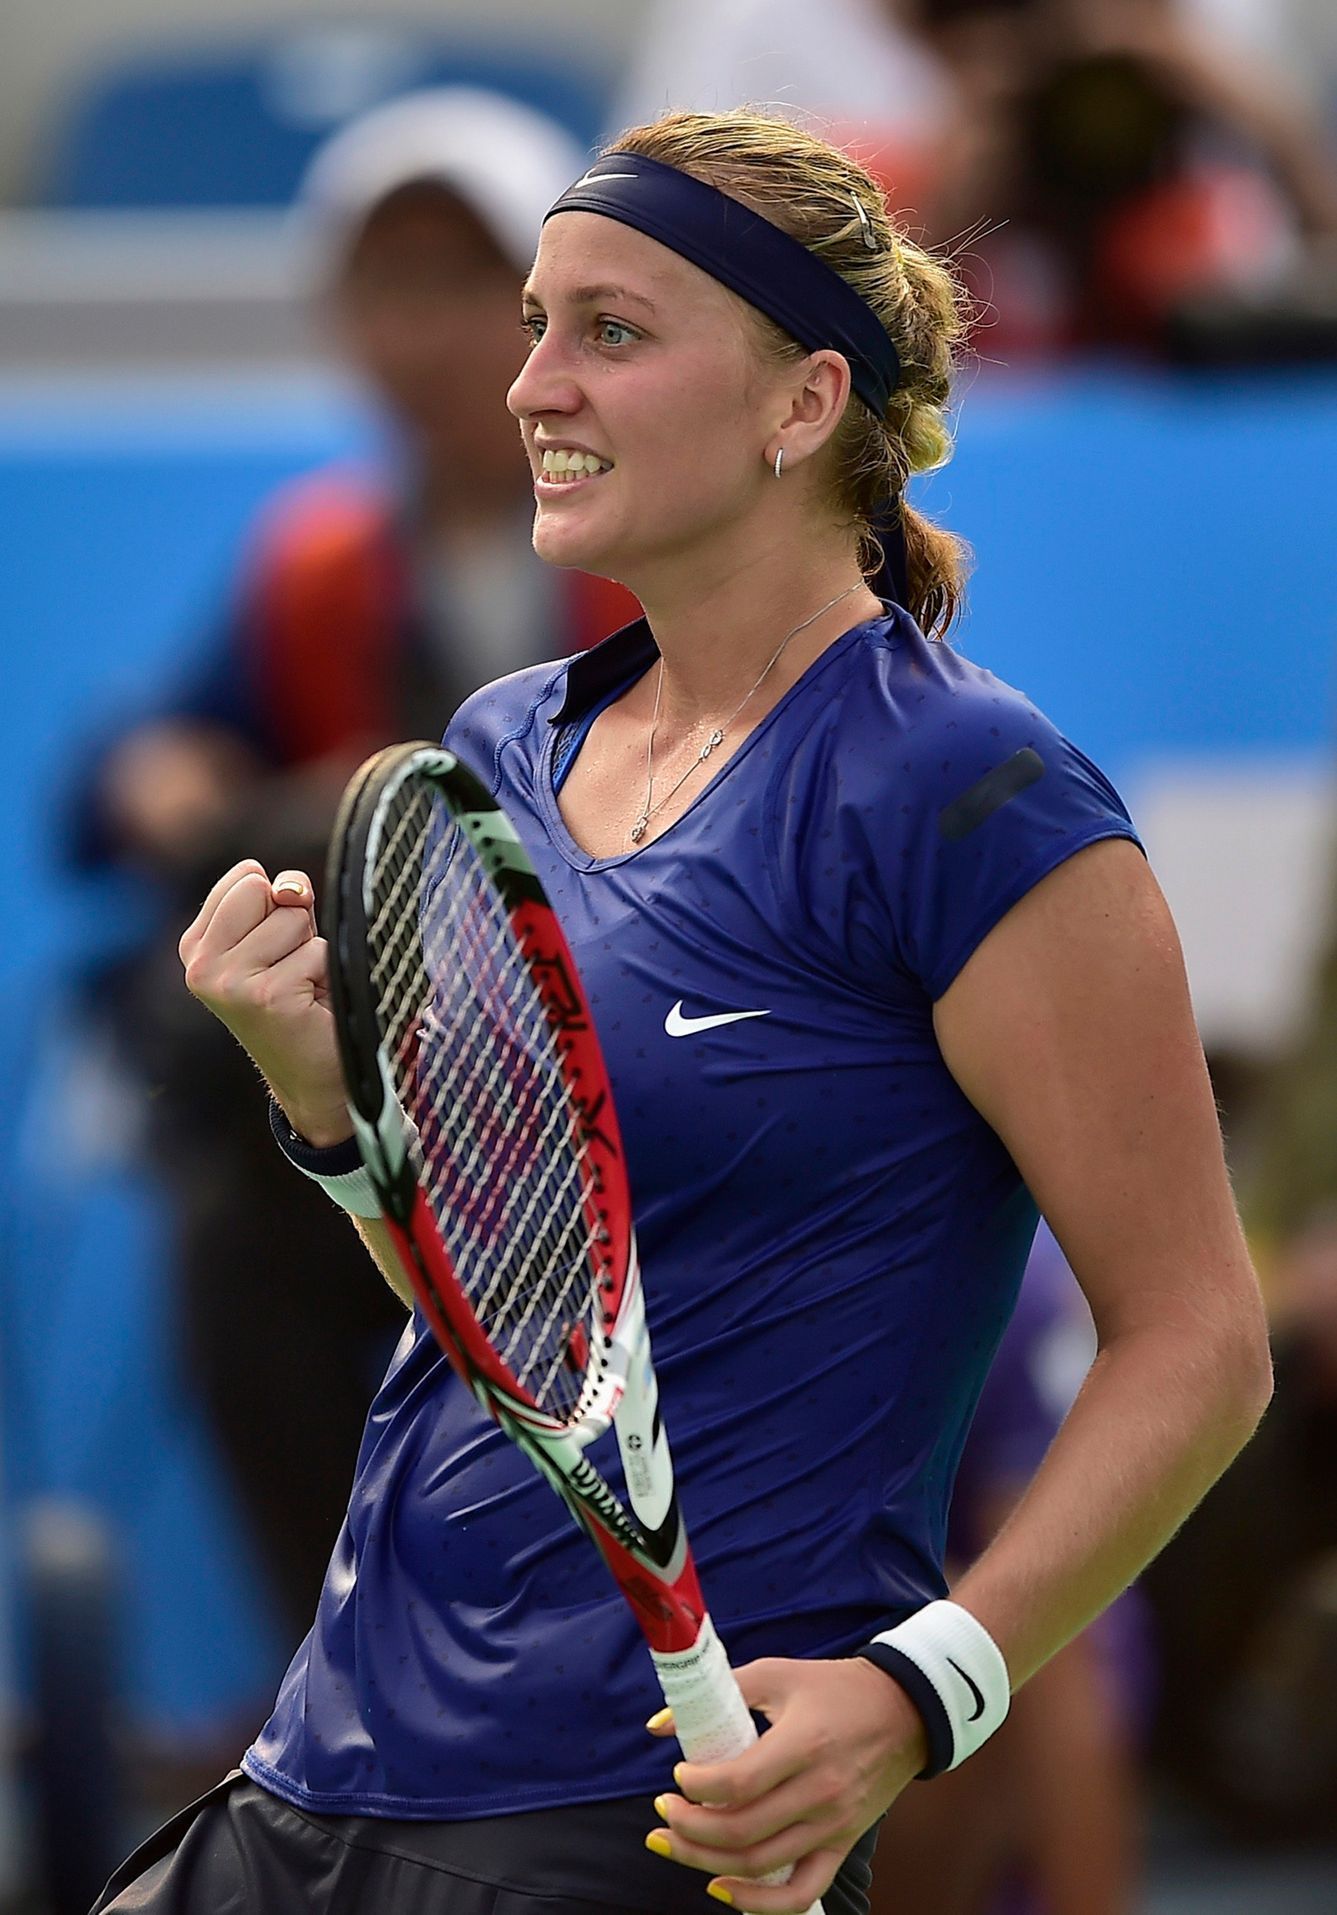 Petra Kvitova of the Czech Republic celebrates as she beats Elina Svitolina of Ukraine during their women's singles semi-final match at the Wuhan Open tennis tournament in Wuhan